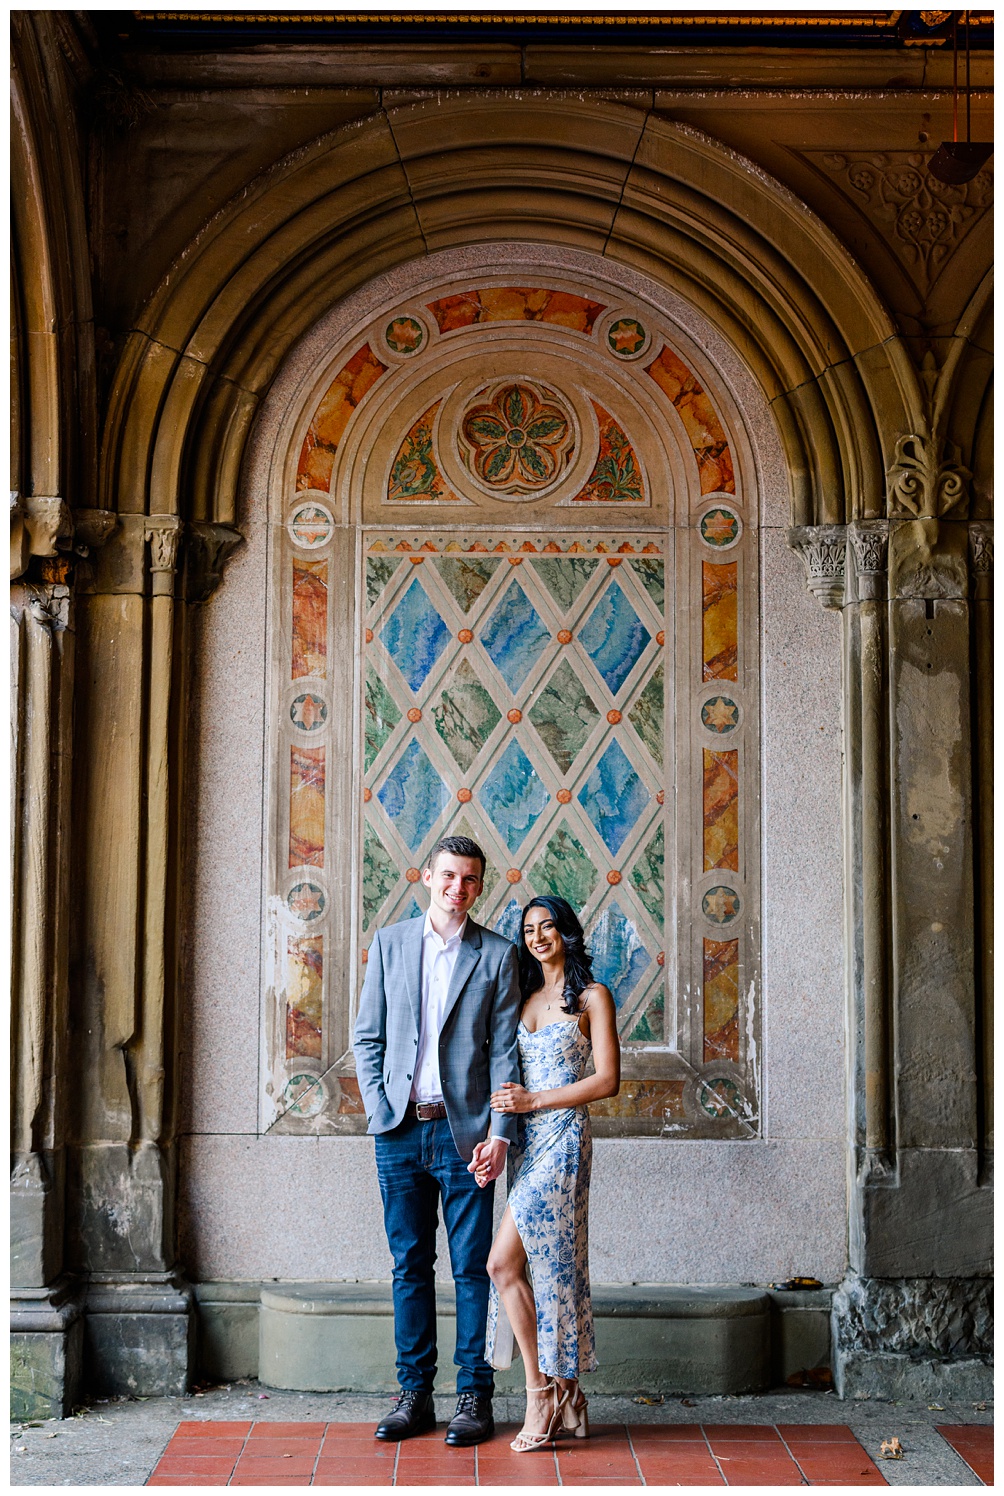 Bethesda Terrace Engagement Photos in Central Park NYC